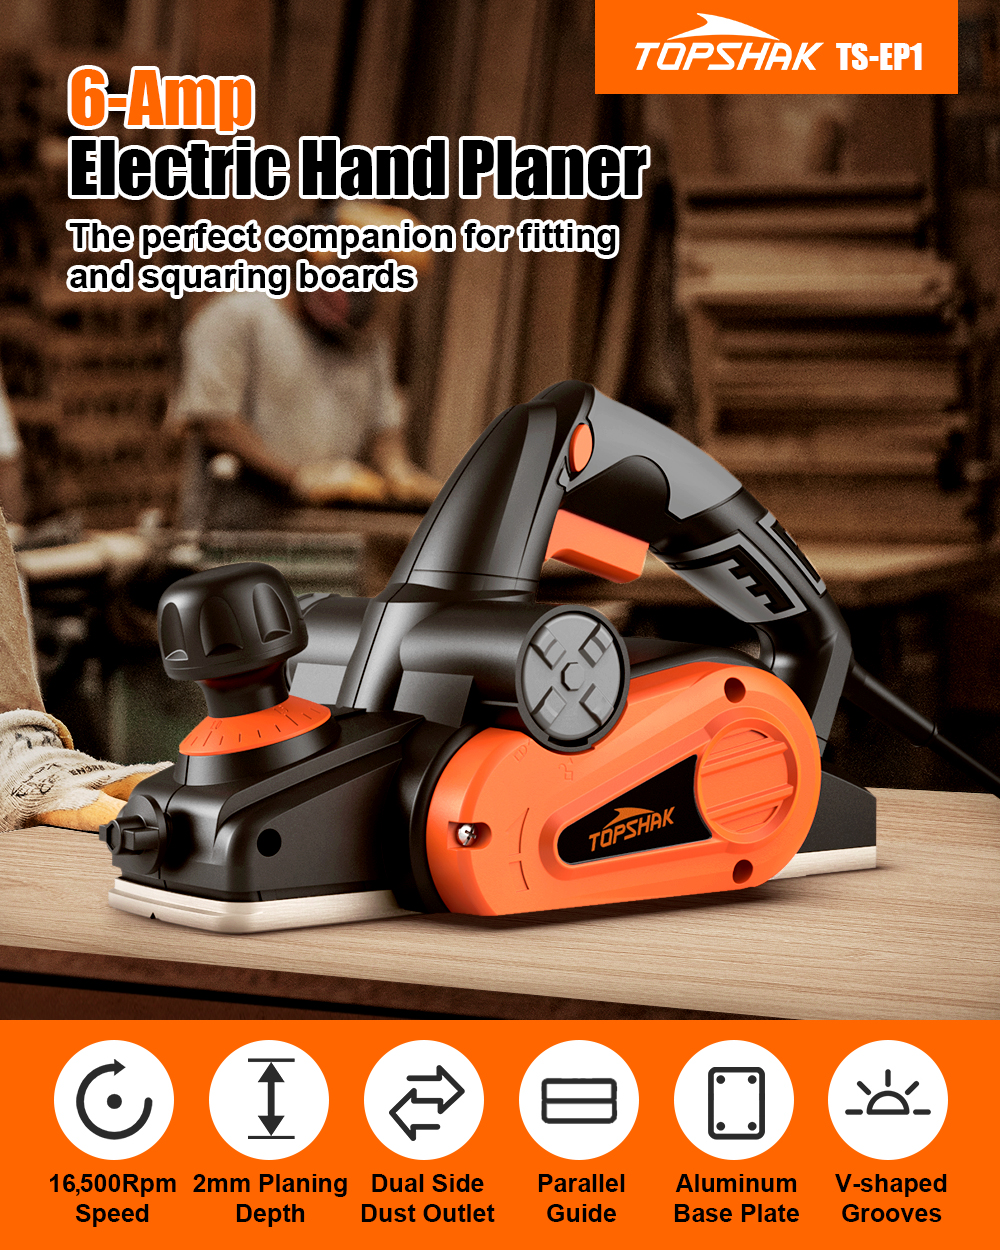 TOPSHAK-EP-1-6-Amp-Electric-Hand-Planer-16500min-32-Wood-Planer-with-Adjustable-Planing-Depth-Power--1911557-2